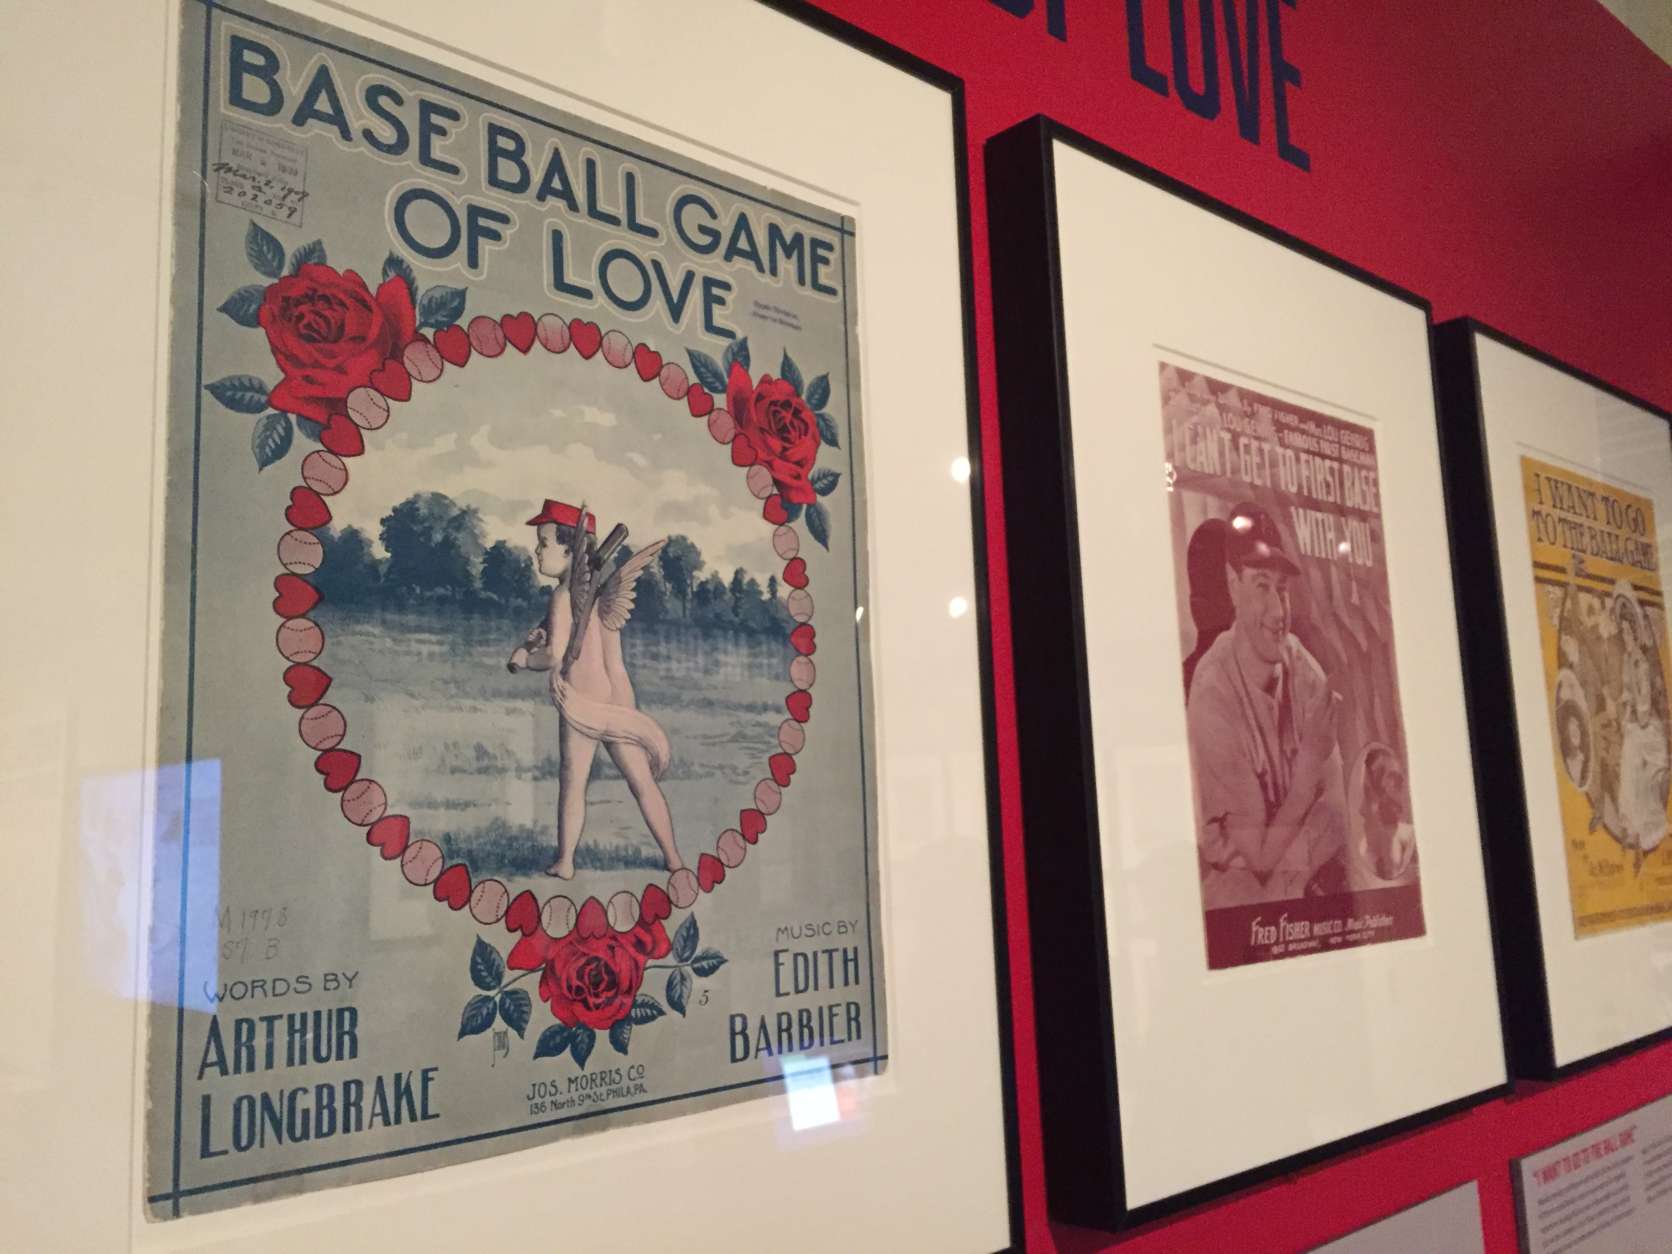 One display pays tribute to songs equating baseball with love. (WTOP/Michelle Basch)